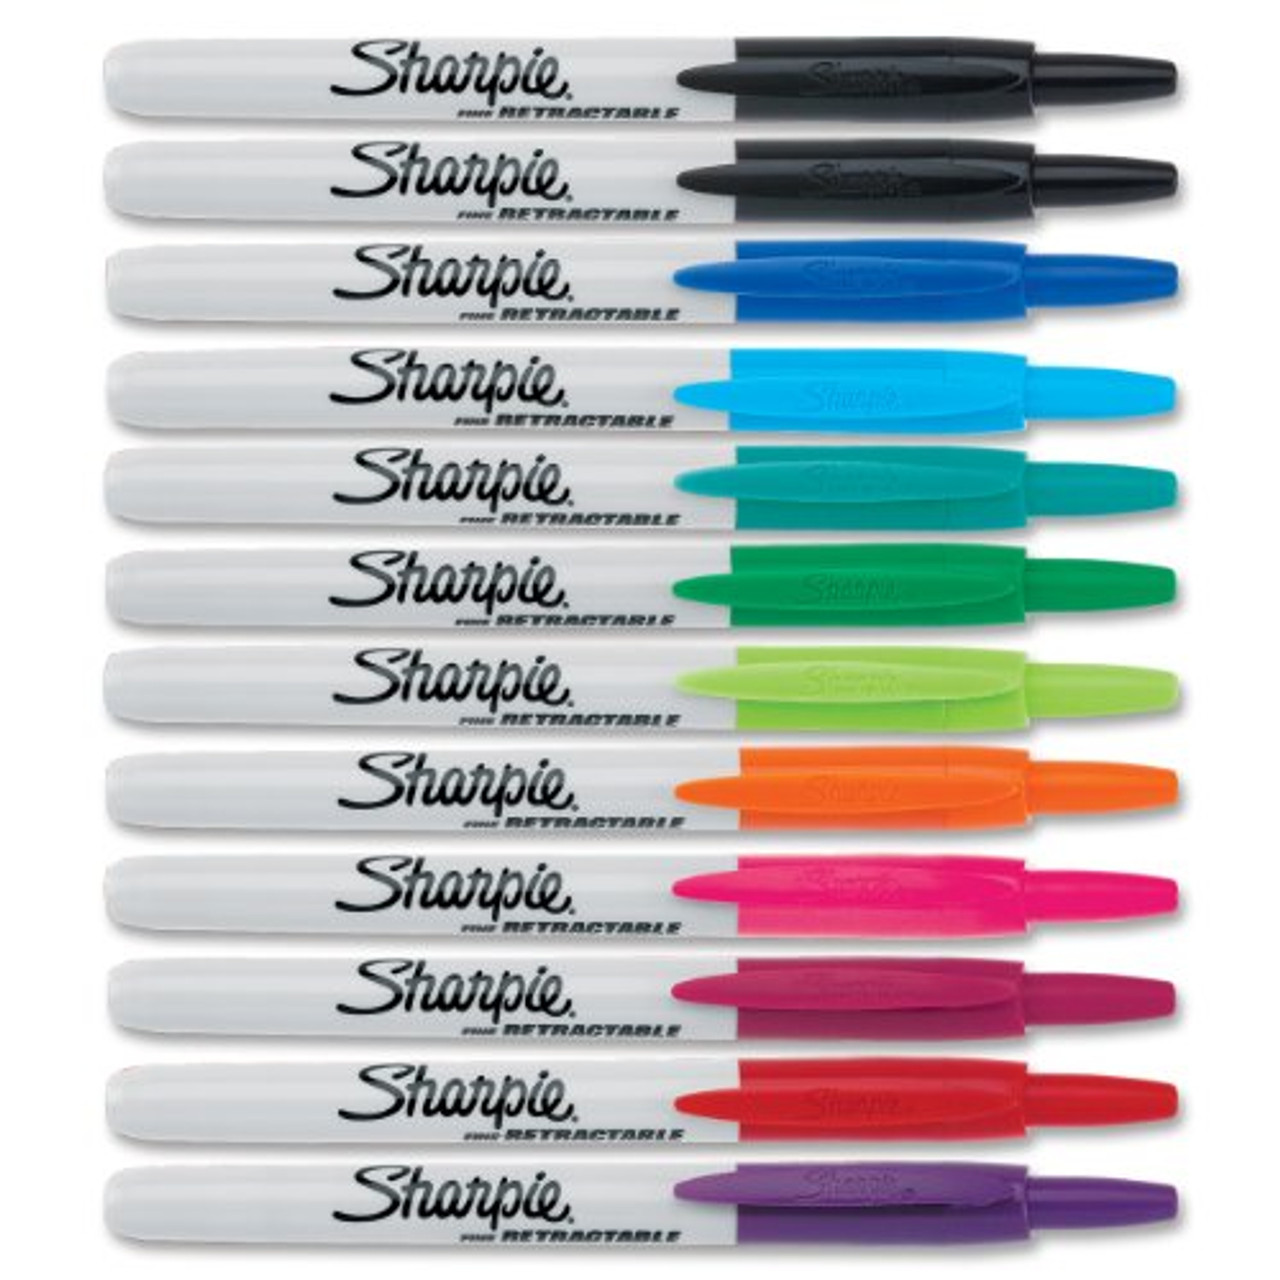 Sharpie - Permanent Marker: Black, Blue, Green & Red, AP Non-Toxic